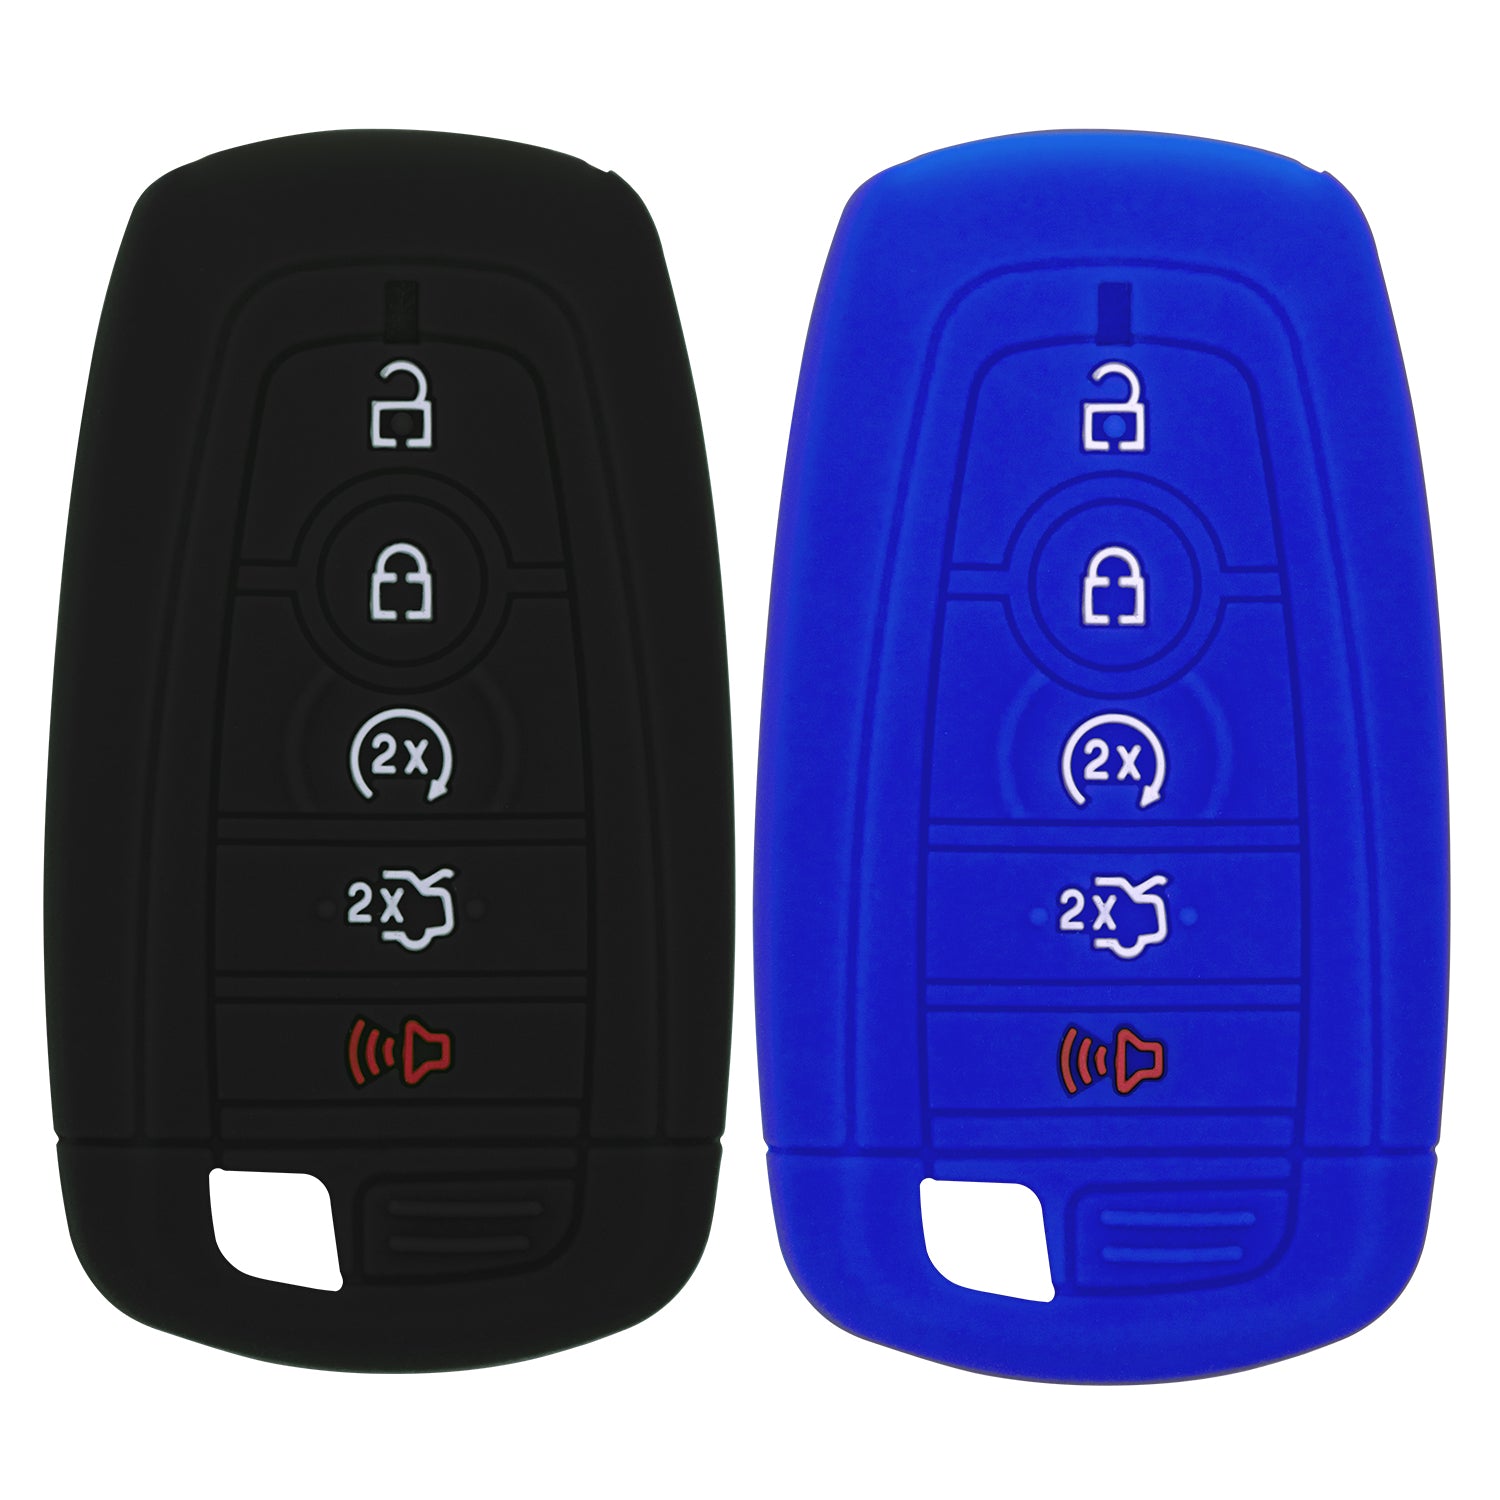 Silicone Case for Smart Key Remote Keyless Entry for Ford Fusion Explorer Edge Mustang Expedition M3N-A2C93142600 164-R8149 164R8149 R8149 (Black & Blue)